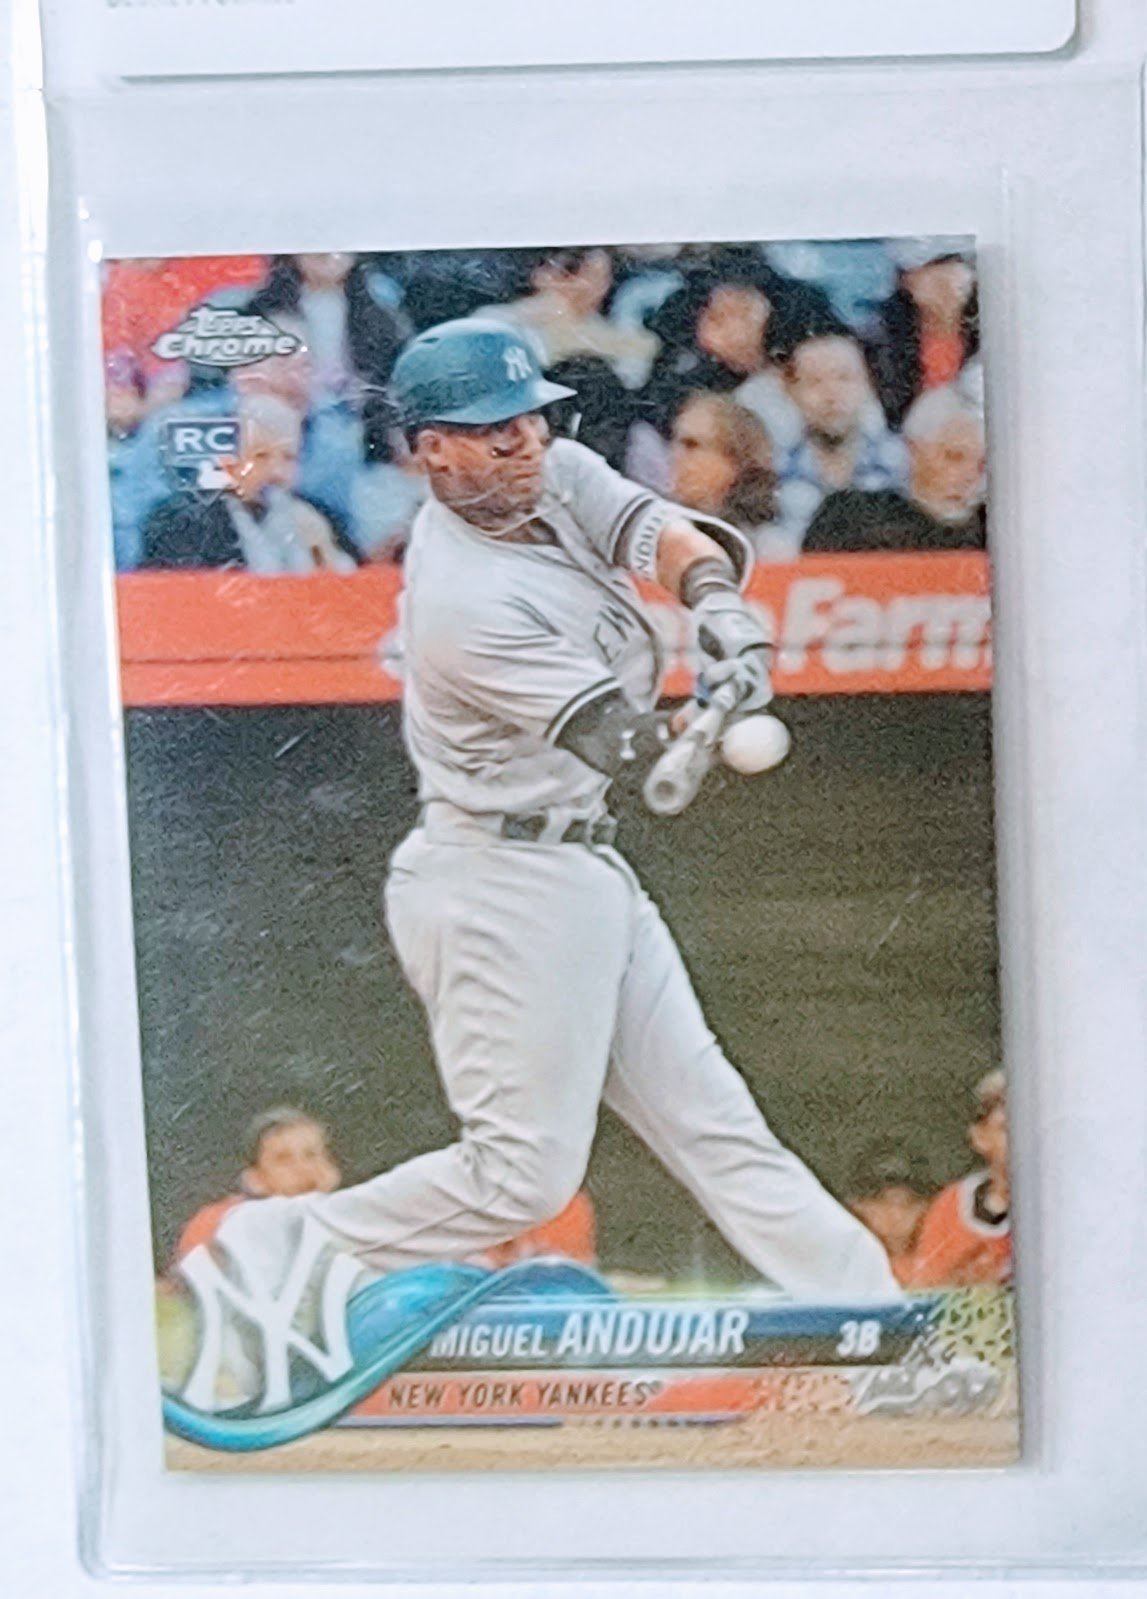 2018 Topps Chrome Miguel Andujar Rookie Baseball Trading Card TPTV simple Xclusive Collectibles   